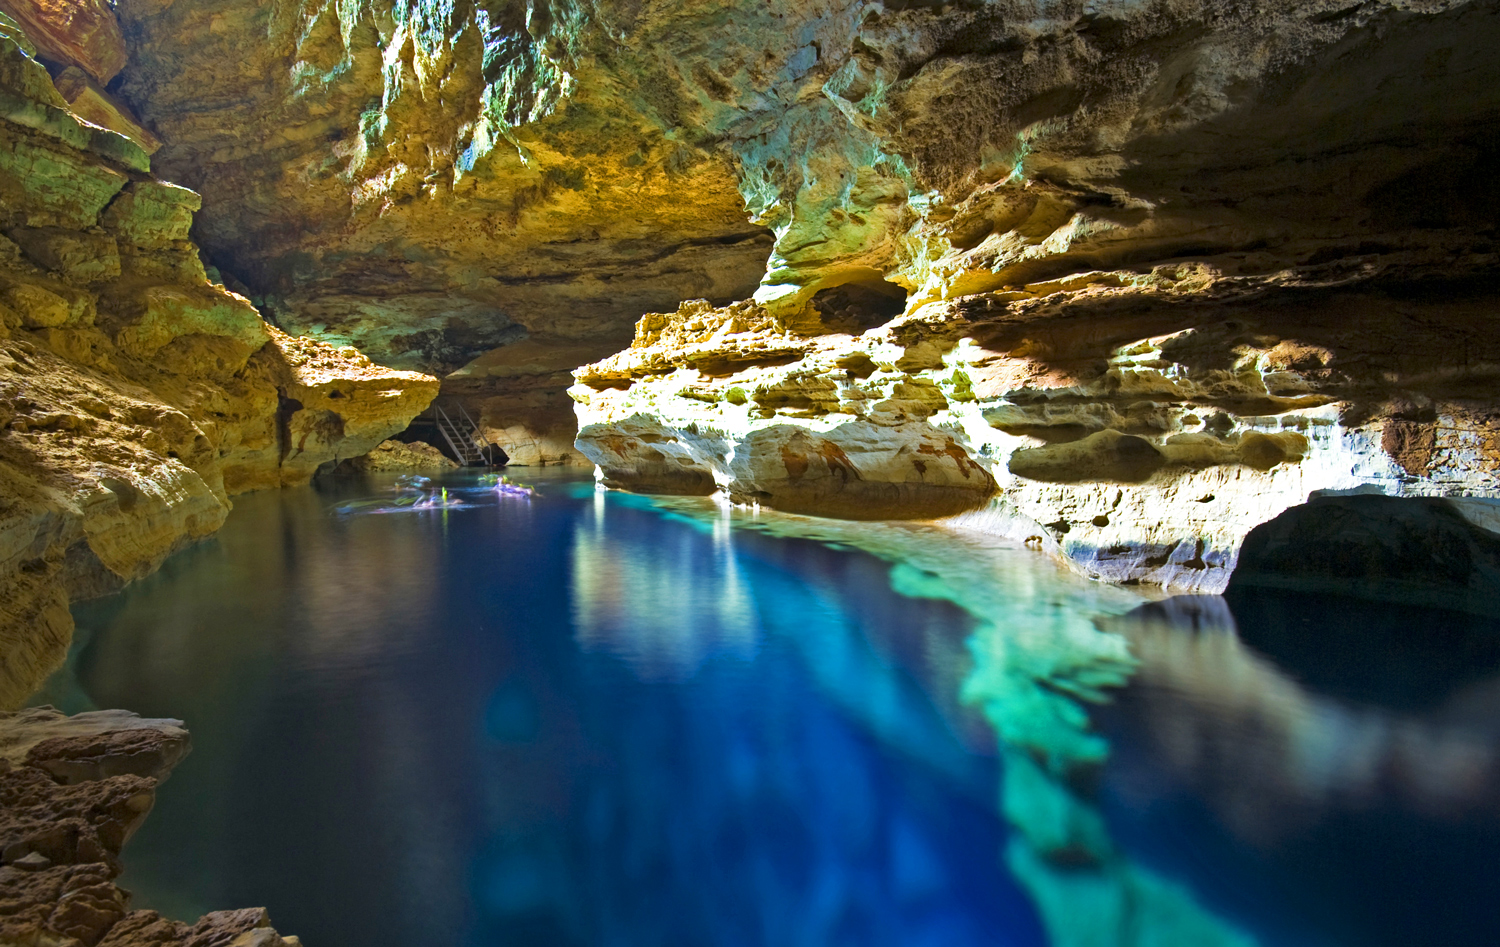 Limestone walls are reflected in a cave pool.